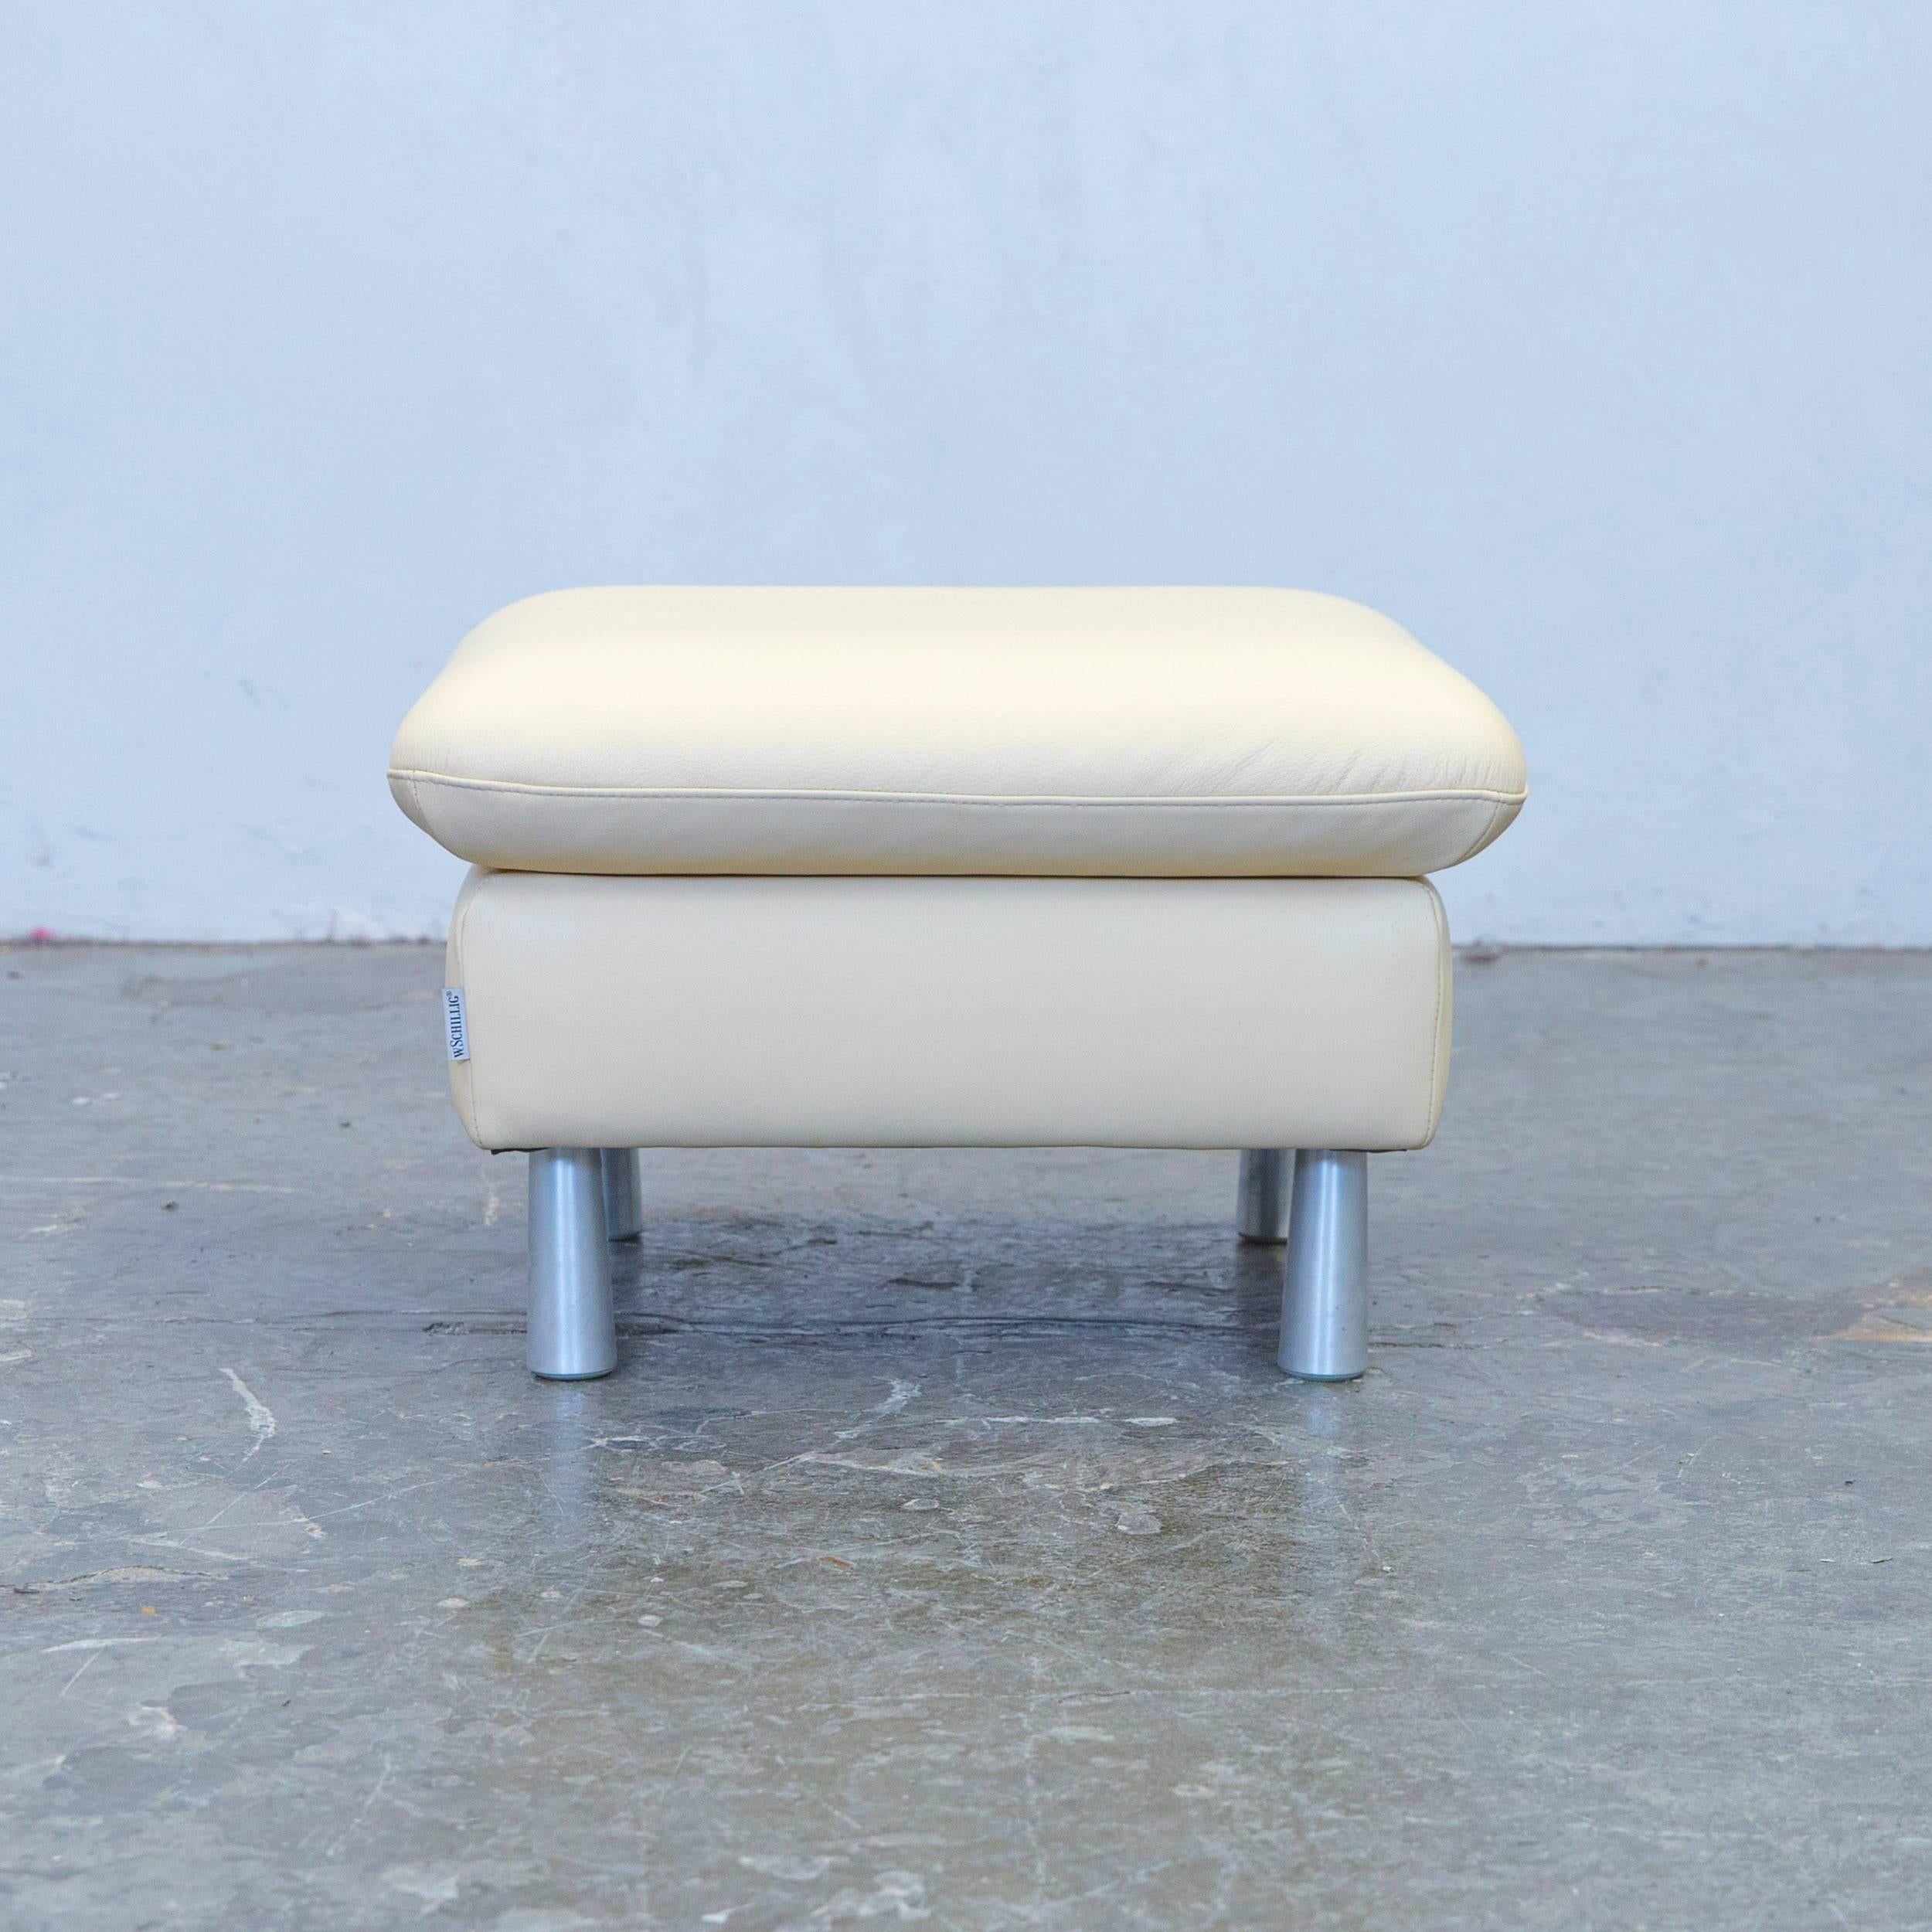 Beige colored Willi Schillig loop designer footstool, in a minimalistic and modern design, made for pure comfort.